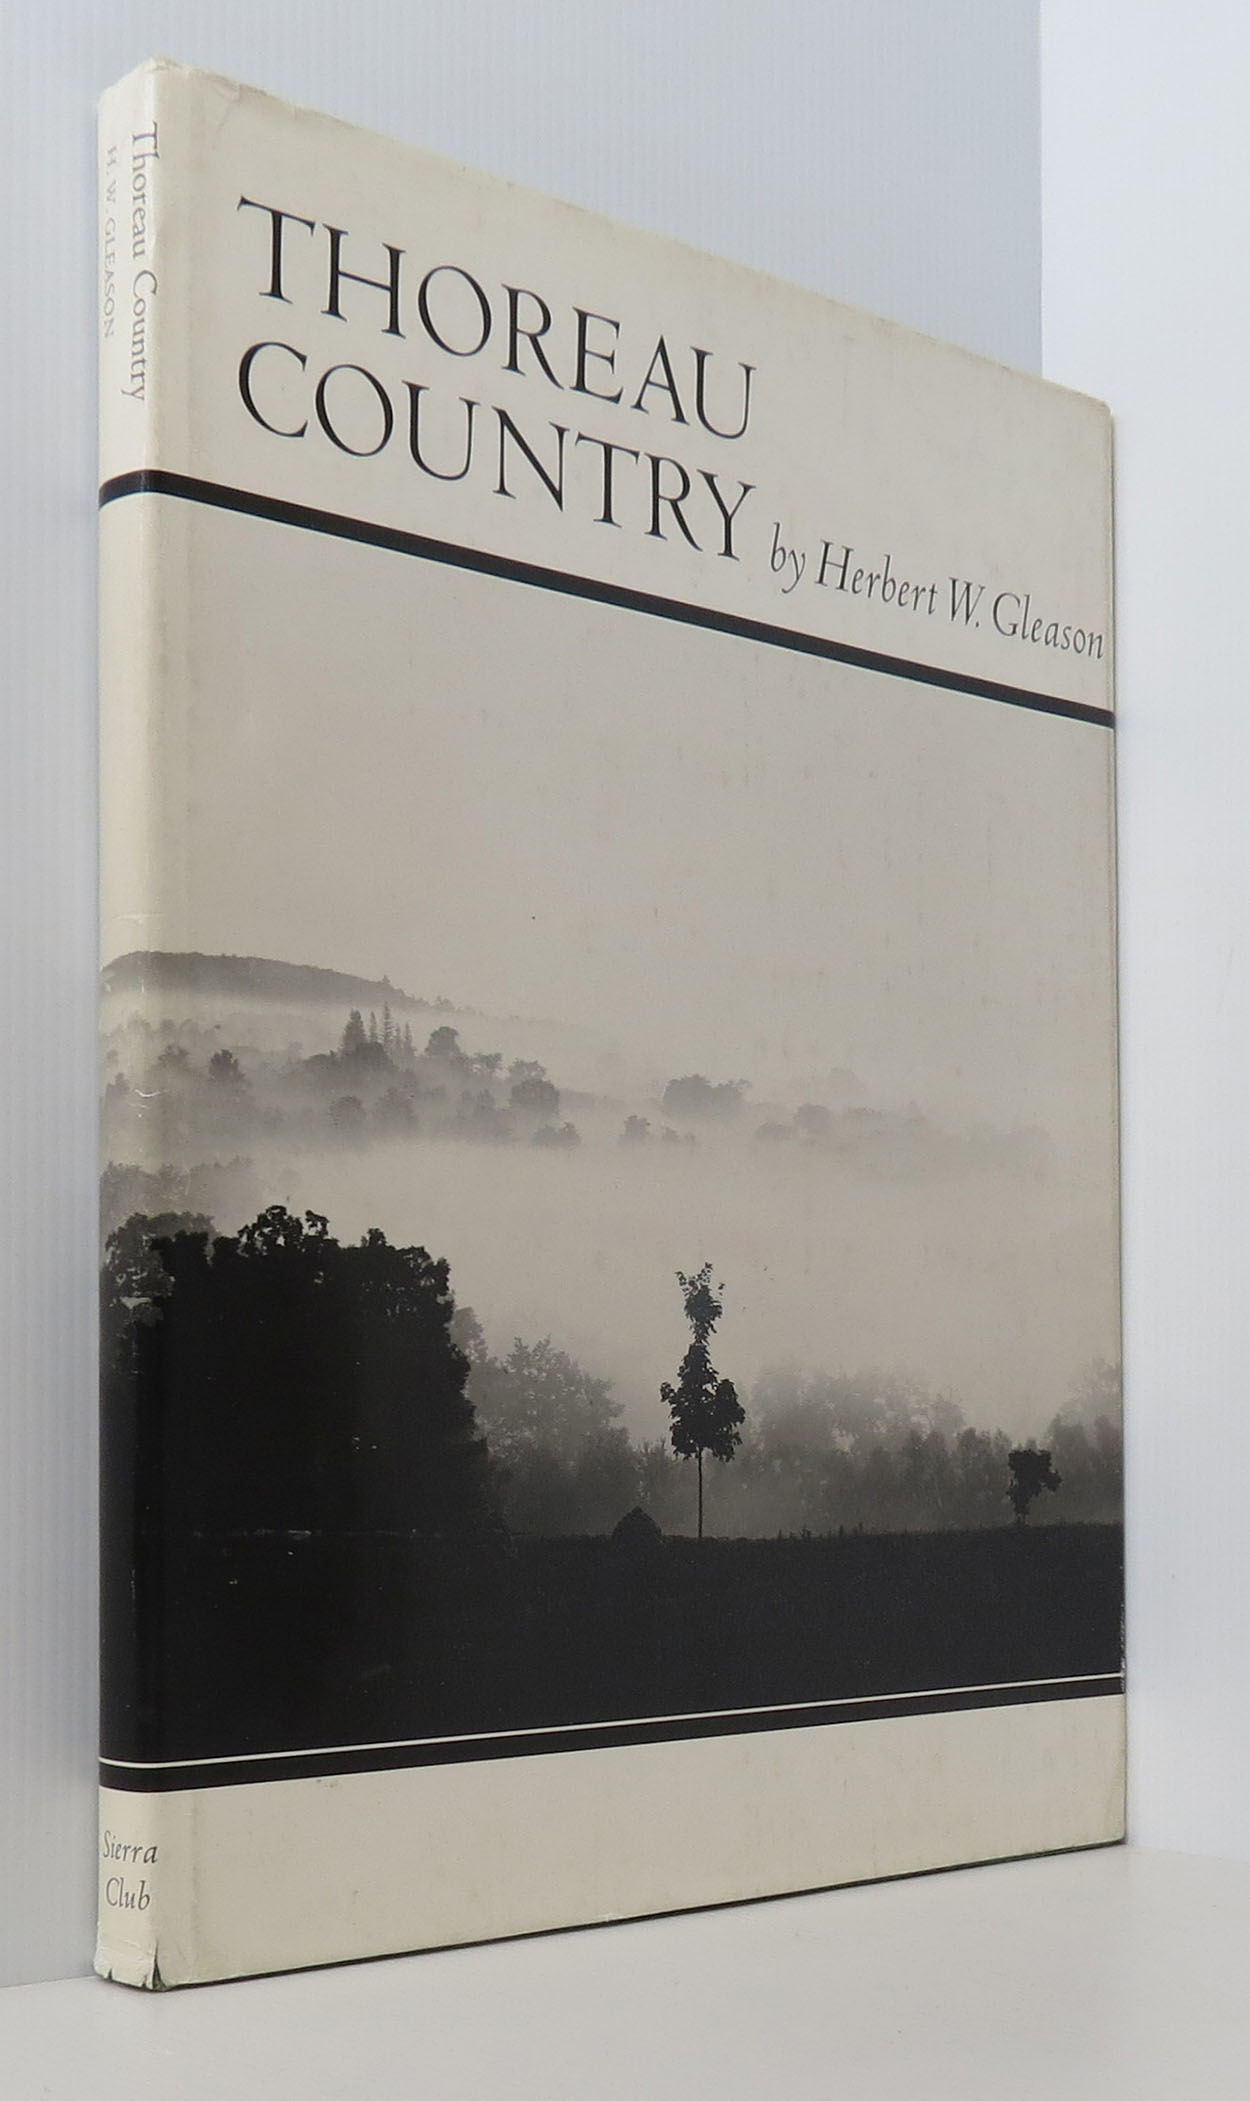 Image for Thoreau Country : Photographs and Text Selections from the Works of H. D. Thoreau / by Herbert W. Gleason ; Edited by Mark Silber ; Introd. by Paul Brooks